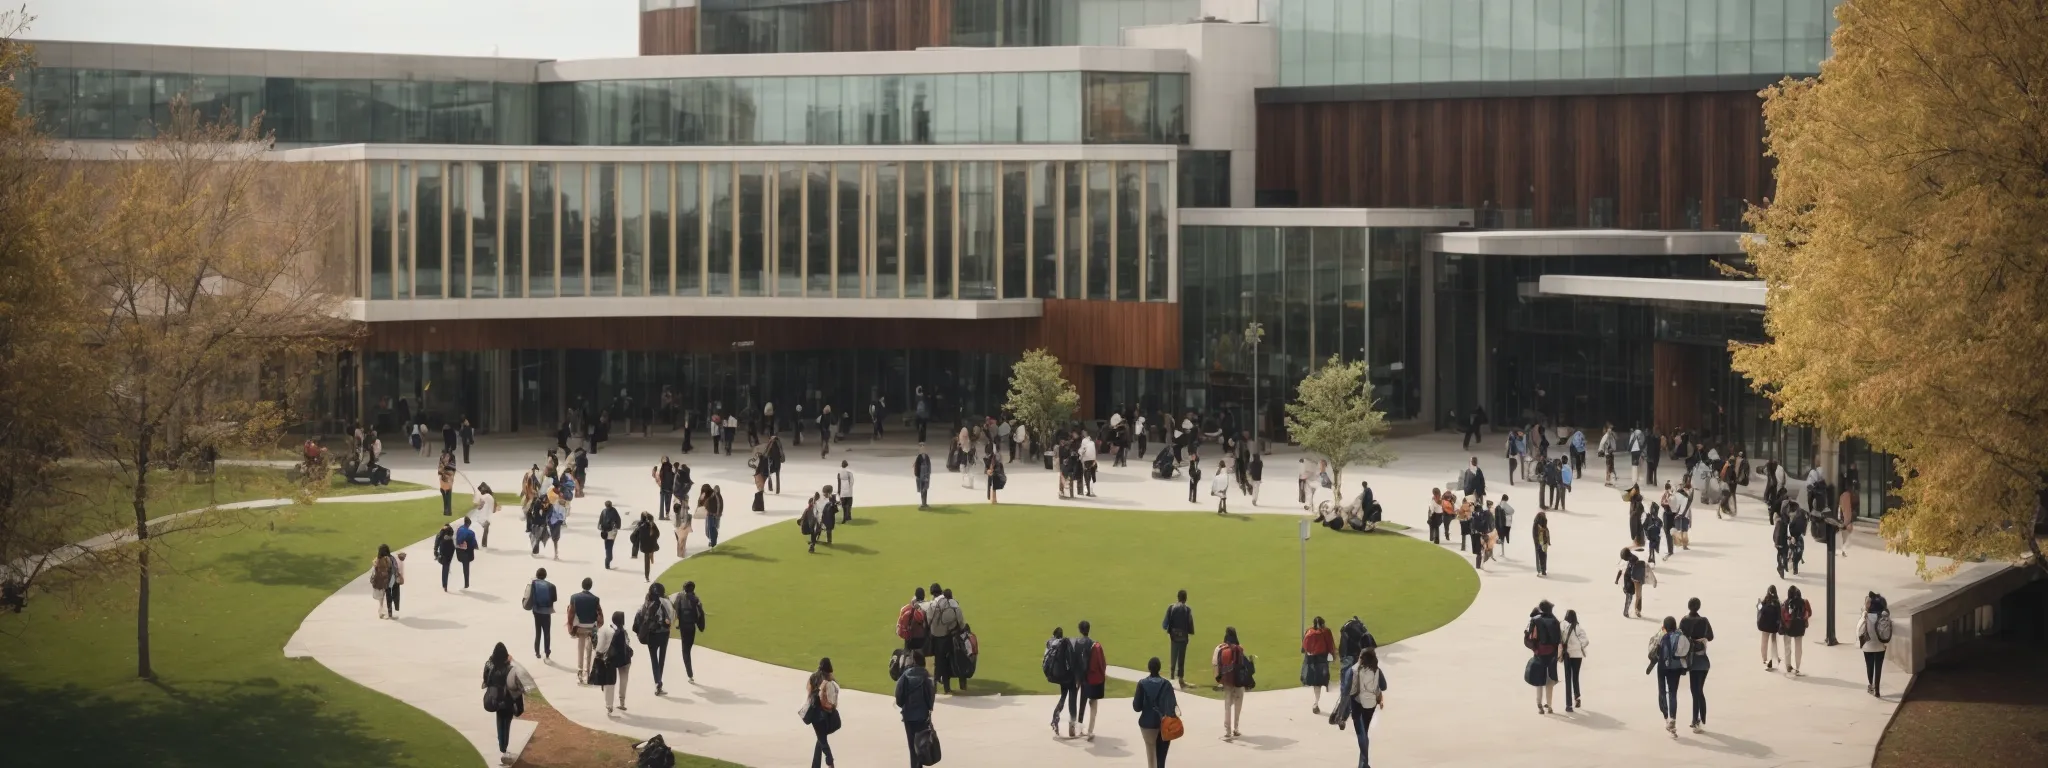 a view of a bustling university campus with students walking between modern buildings, symbolizing a connected educational community.